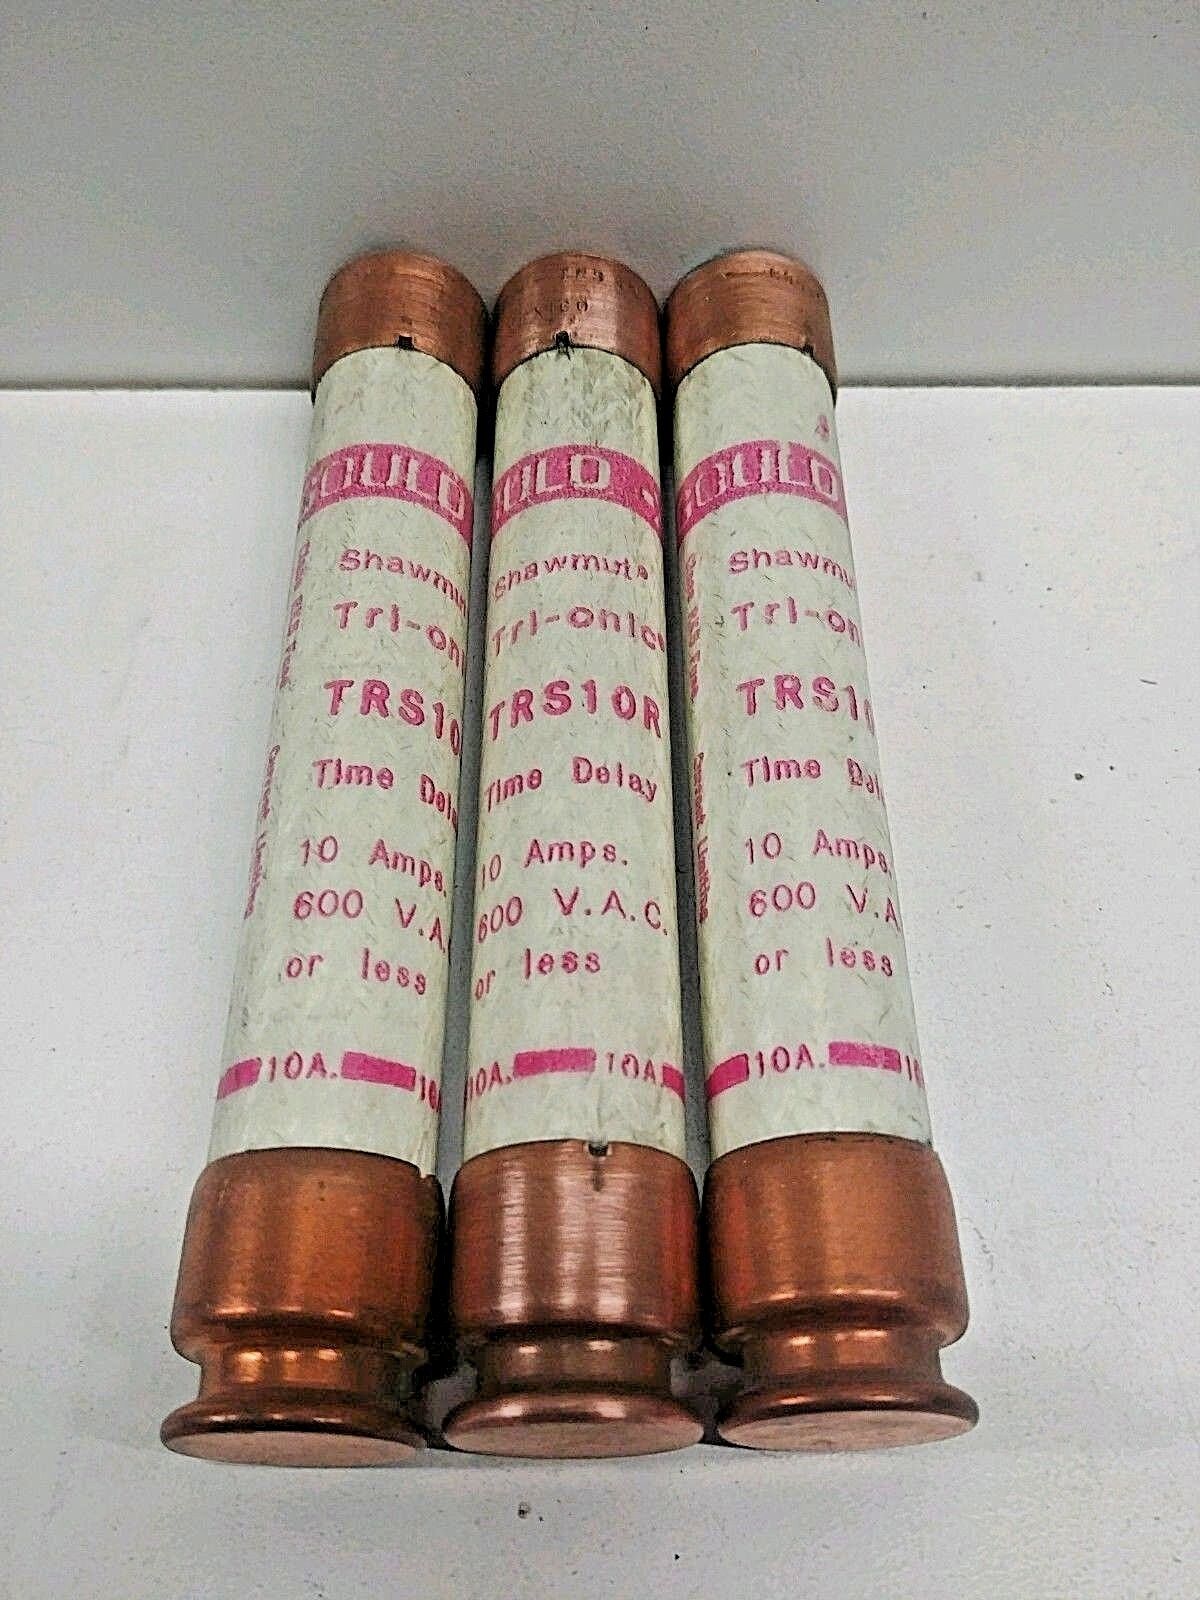 LOT OF (3) NEW OLD STOCK GOULD SHAWMUT 10 AMP 600V RK5 FUSES TRS-10-A